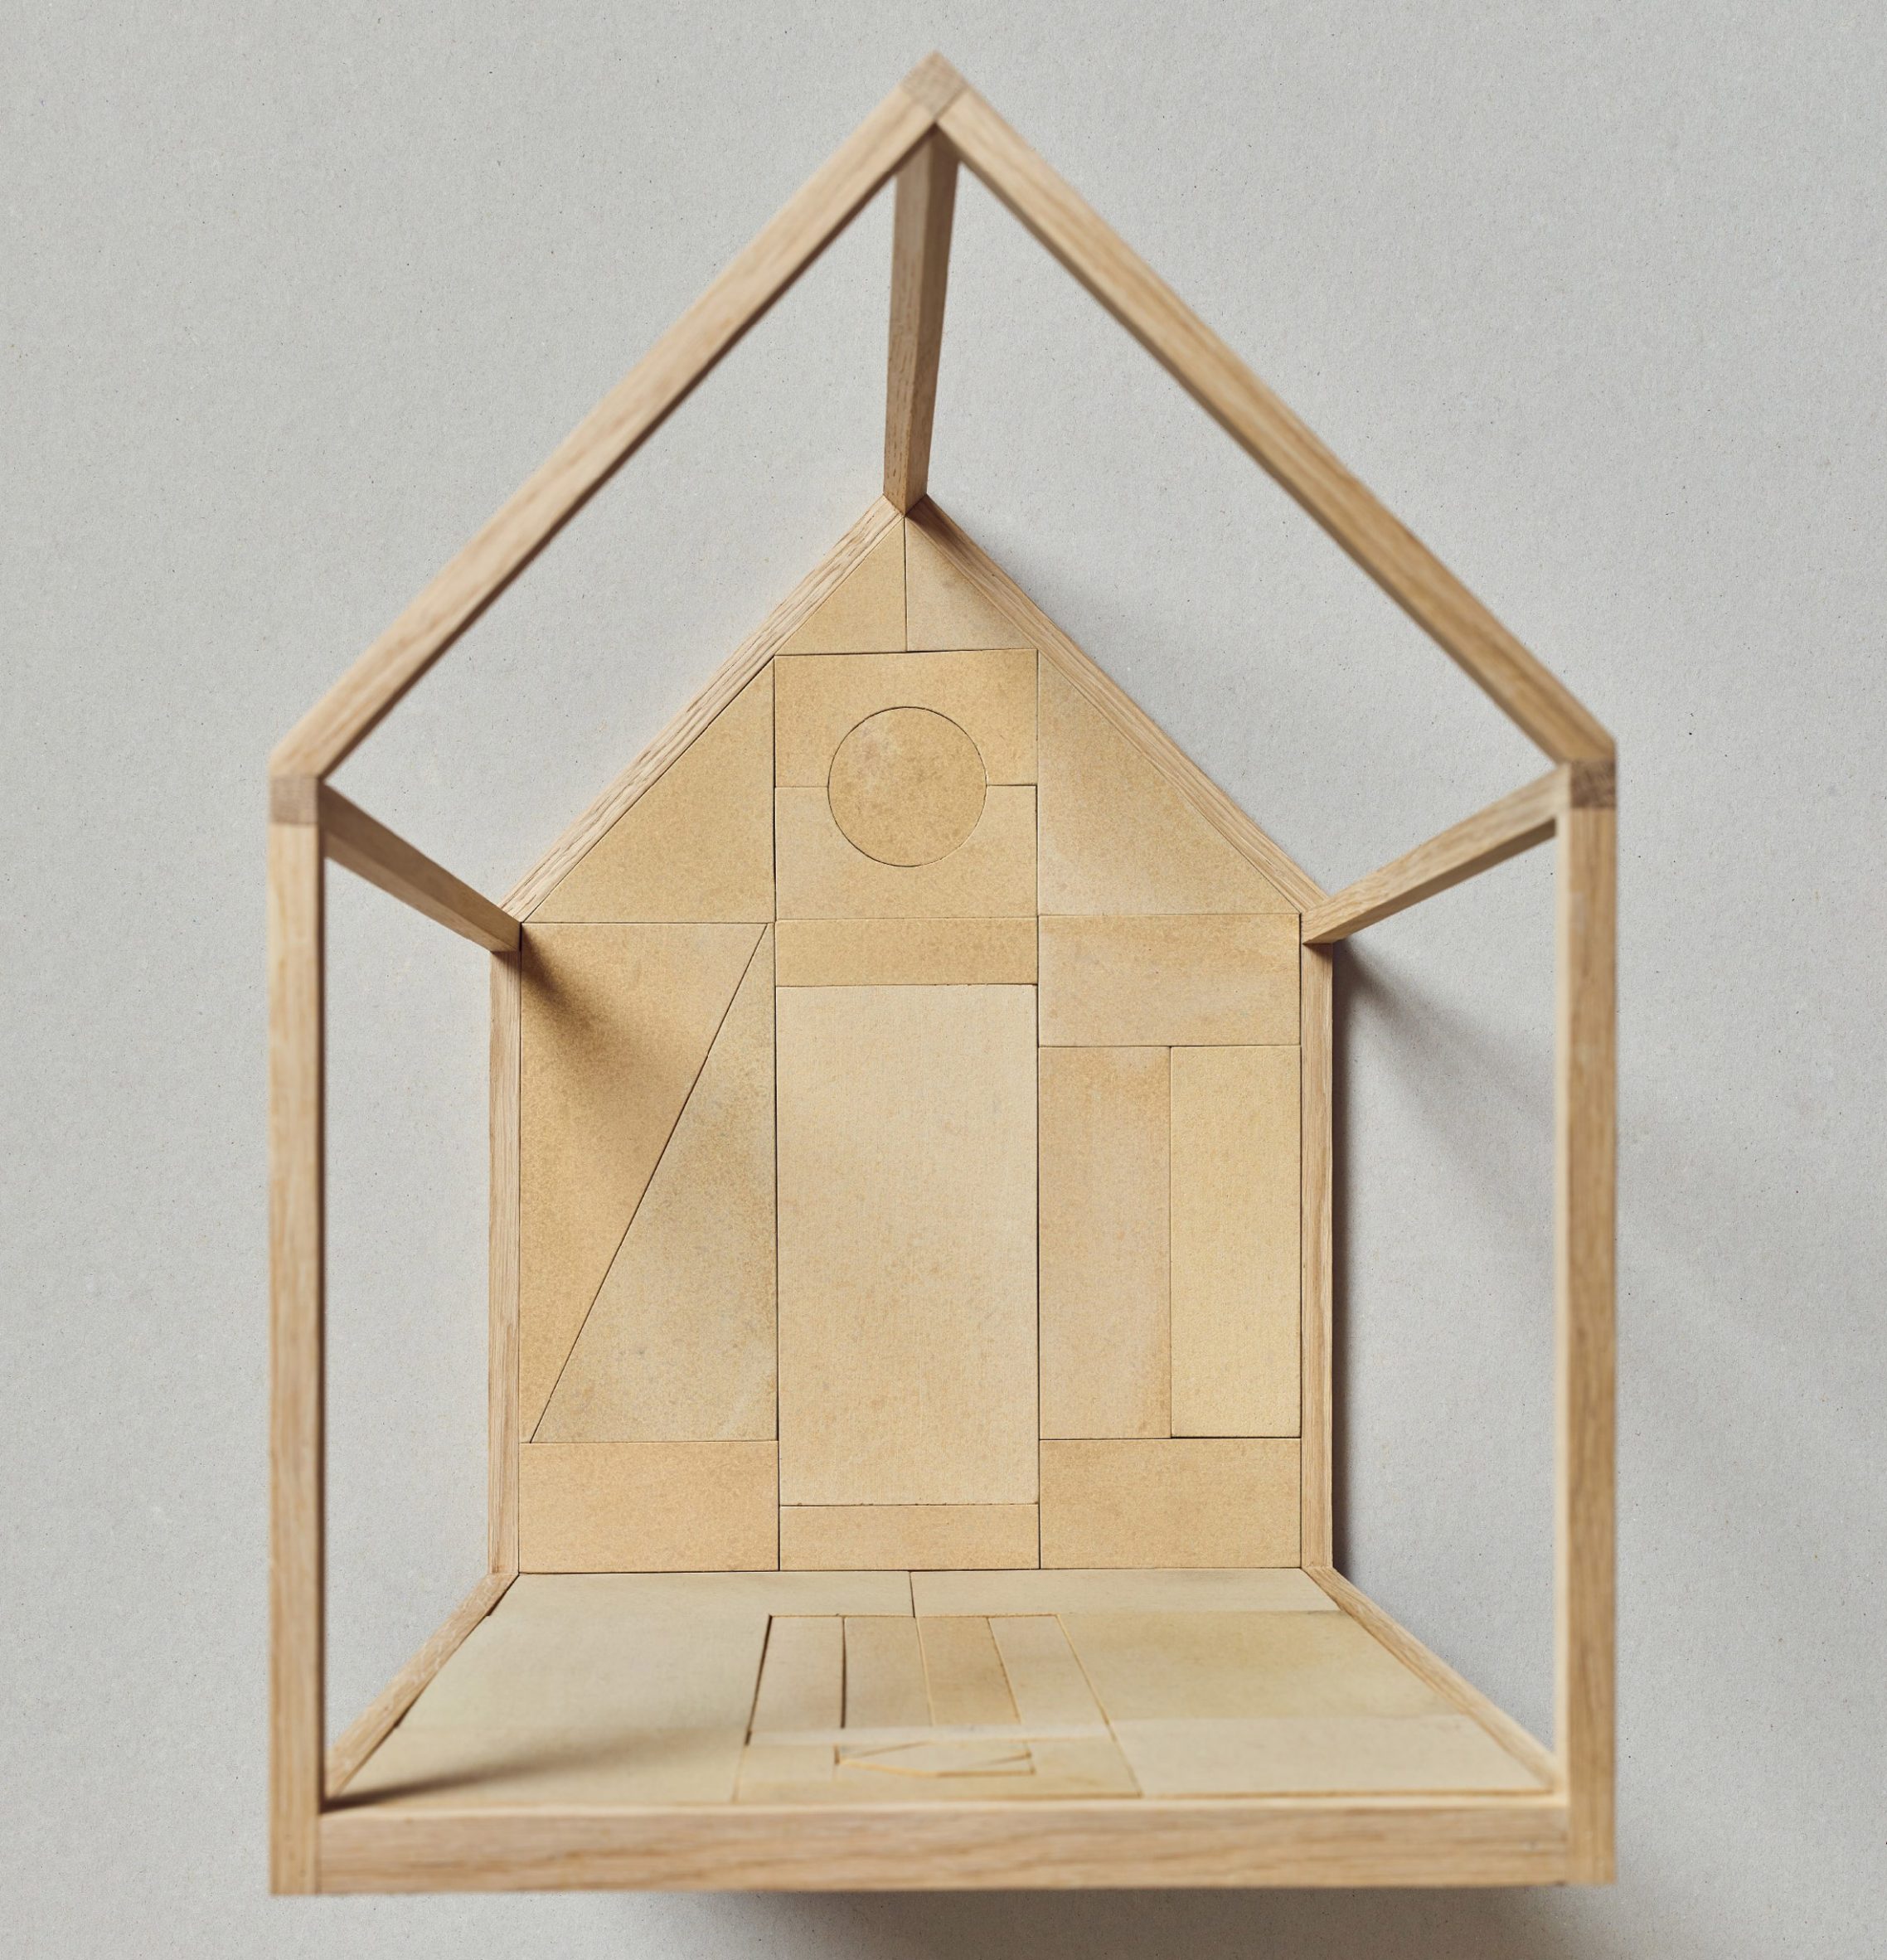 Wooden gabled model structure